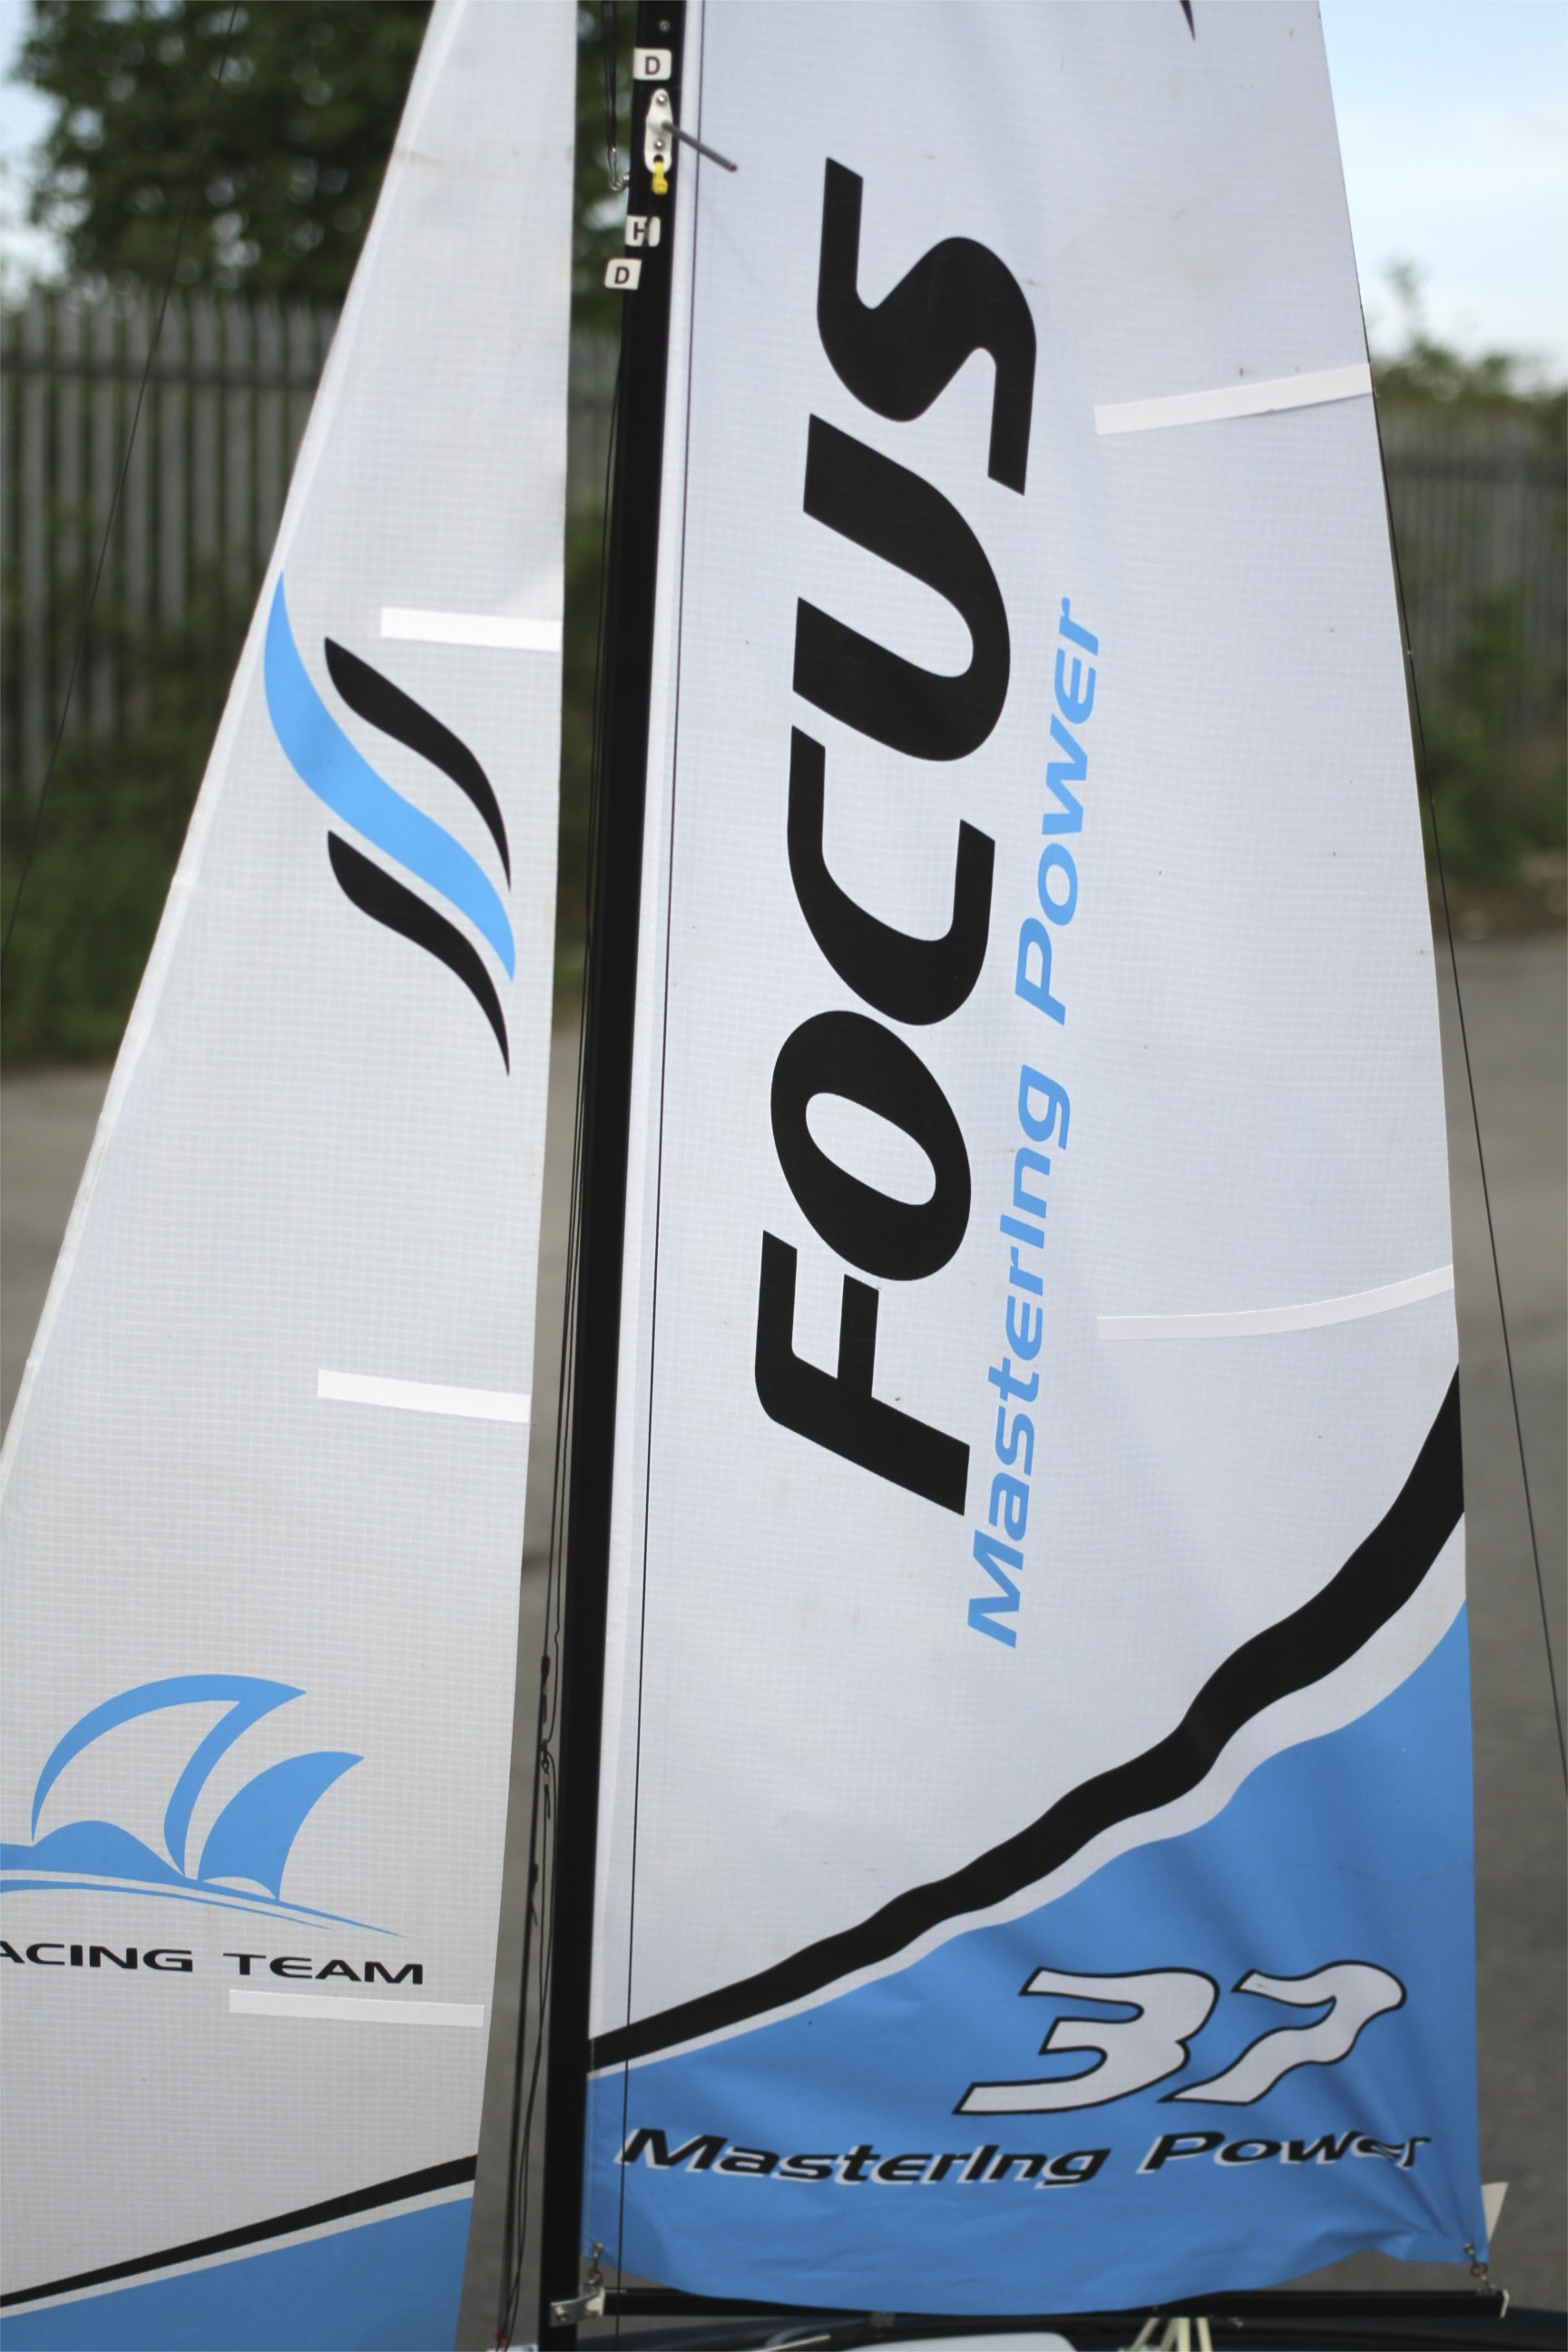 A Focus Racing Team pond yacht. No. - Image 3 of 3